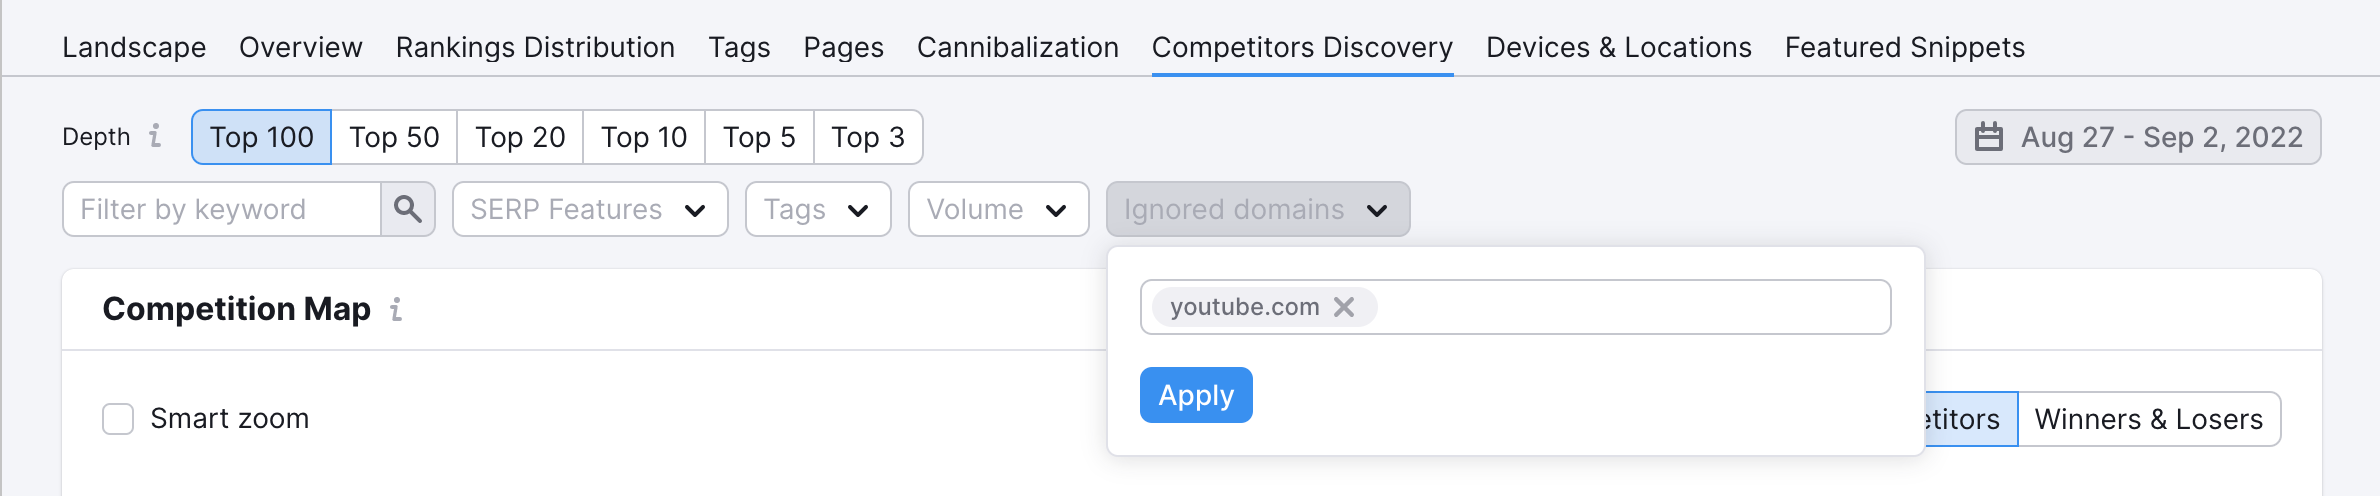 Competitors Discovery hiding domains